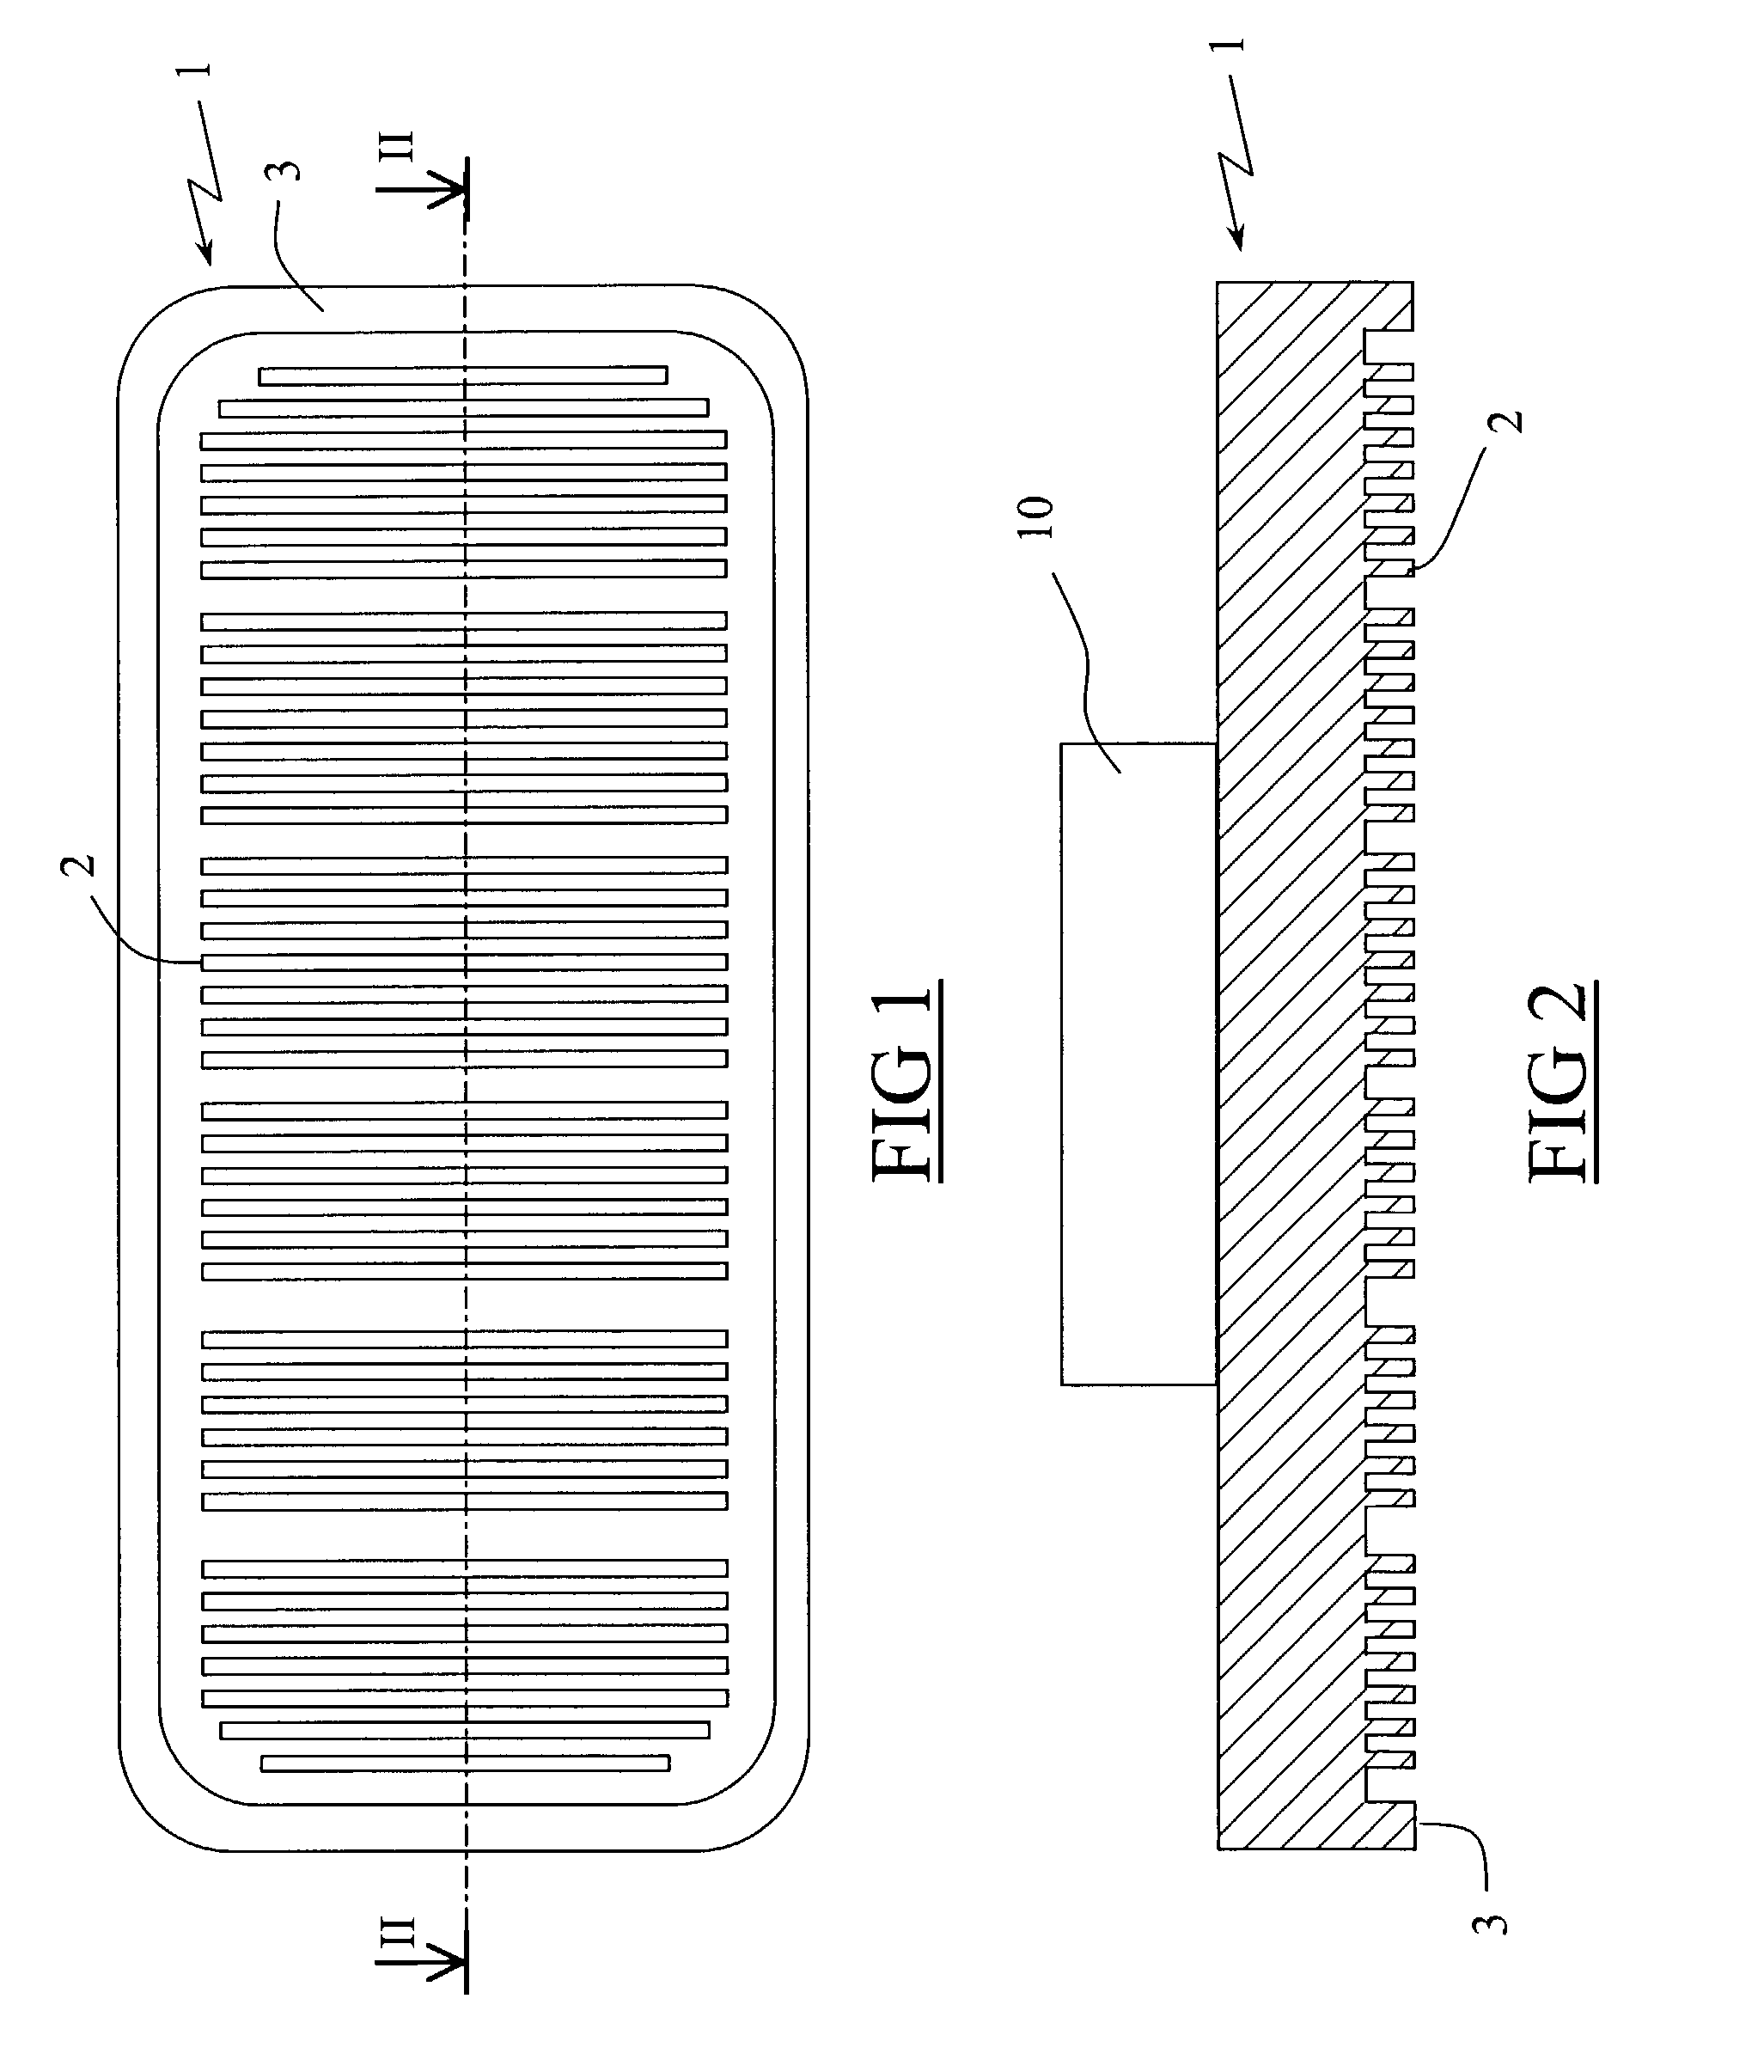 Method of improving the properties of adhesion of a non-oxide ceramic substrate before gluing it